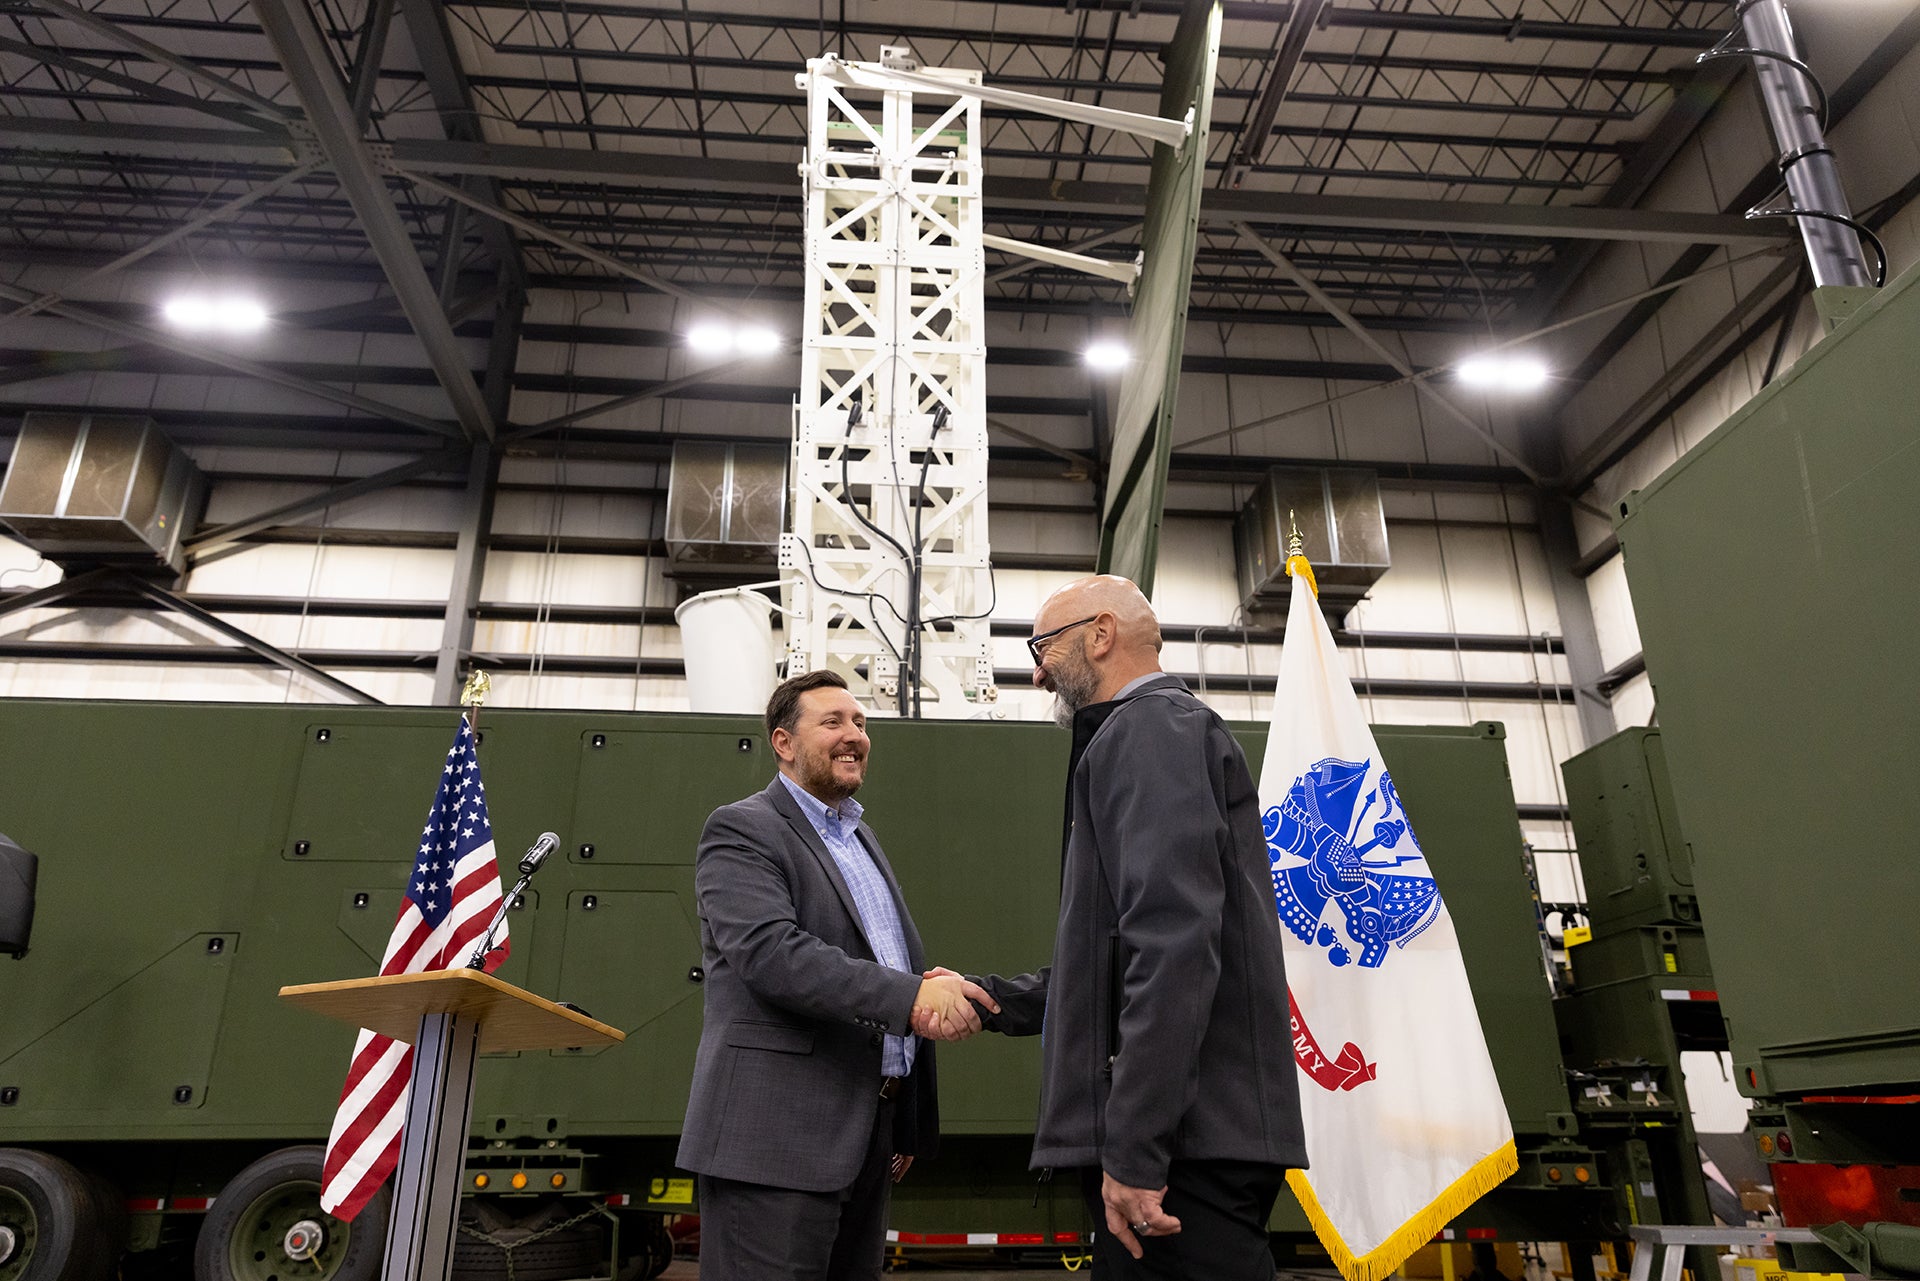 Ceremony of the completion and signing over of the DD250  in High Bay in Baltimore on Wednesday, November 30, 2022.